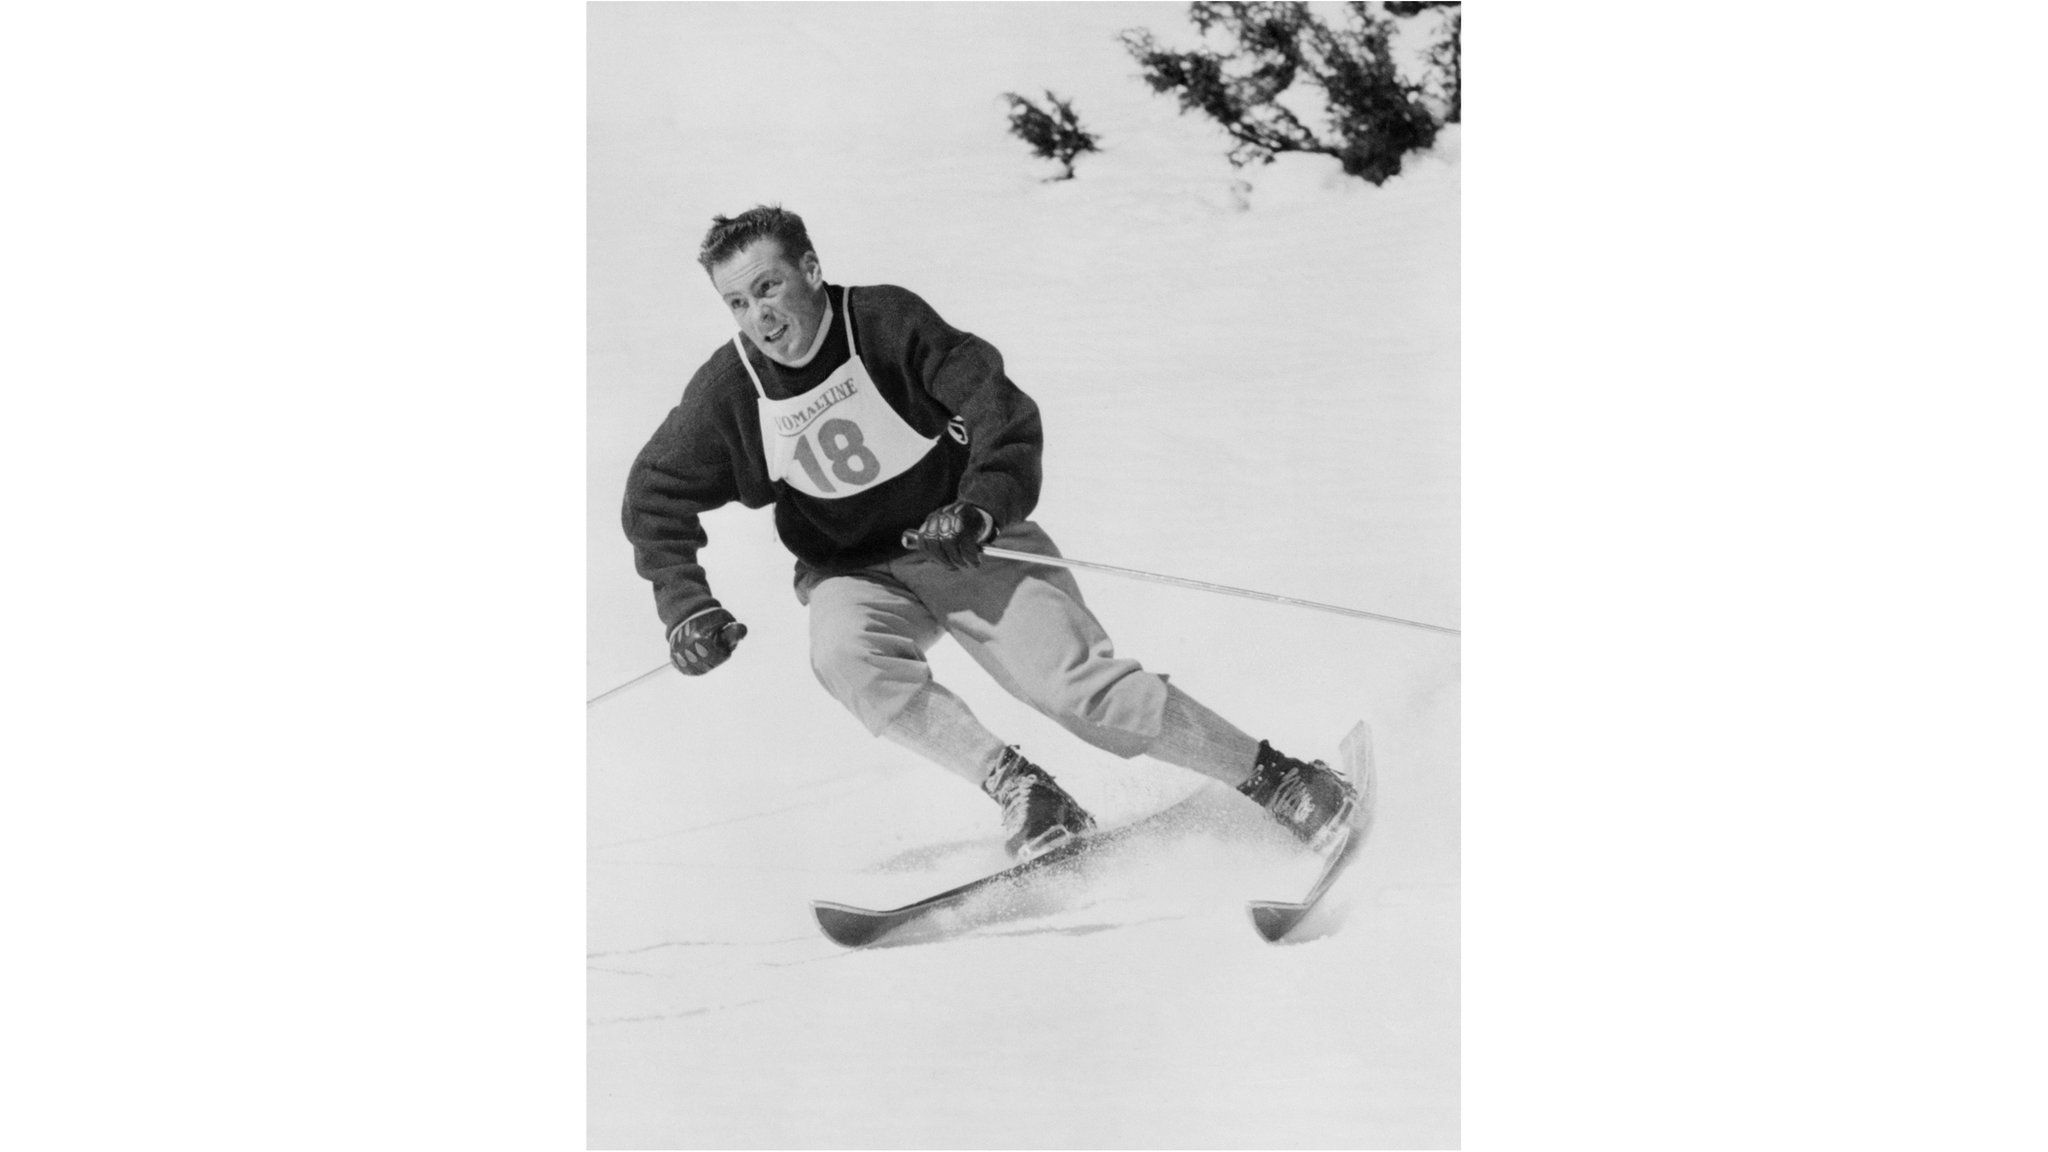 French skier Jean Vuarnet competing during the Winter Olympic Games, Feb 1960